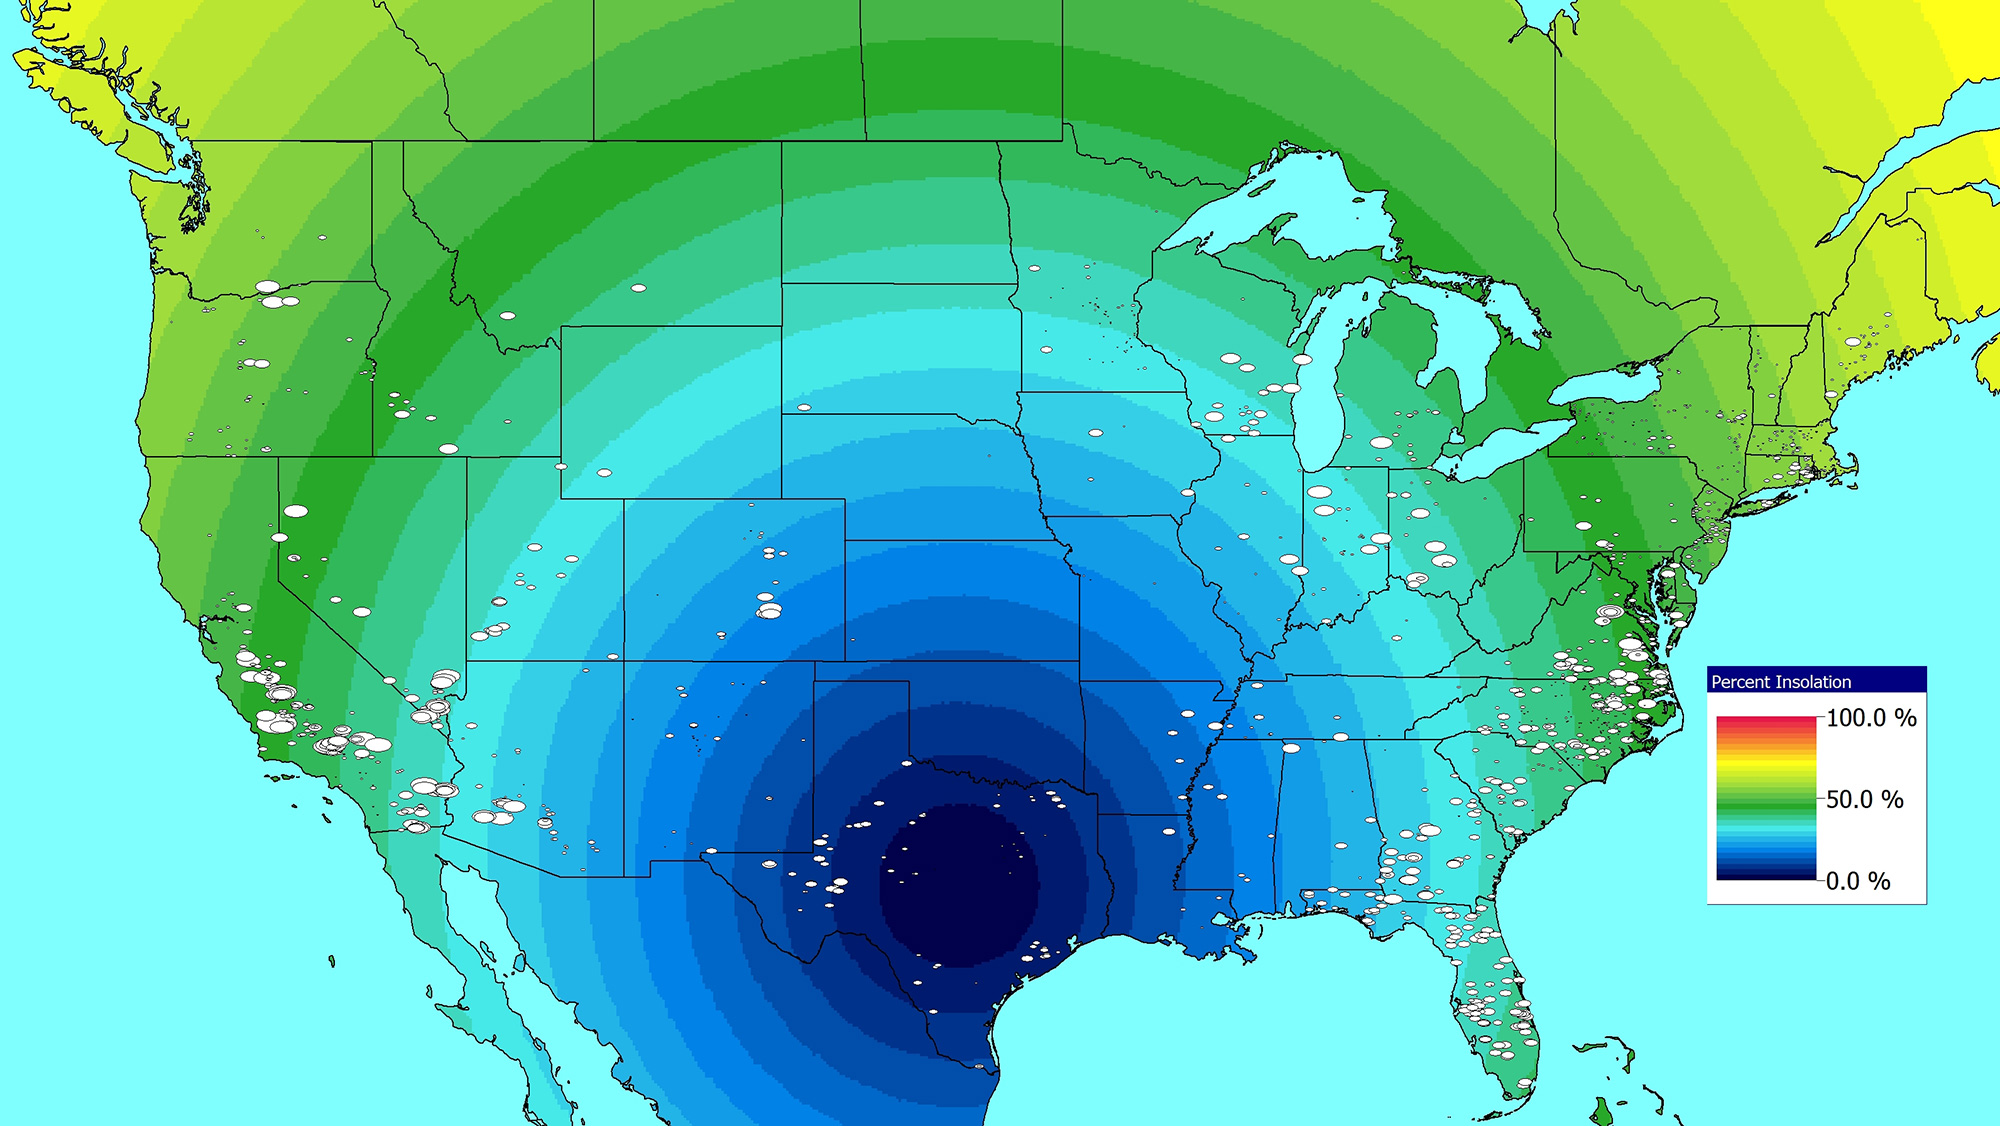 Thermal map of North America from 2023 showing percent insolation markers for 0%, 50%, and 100%.